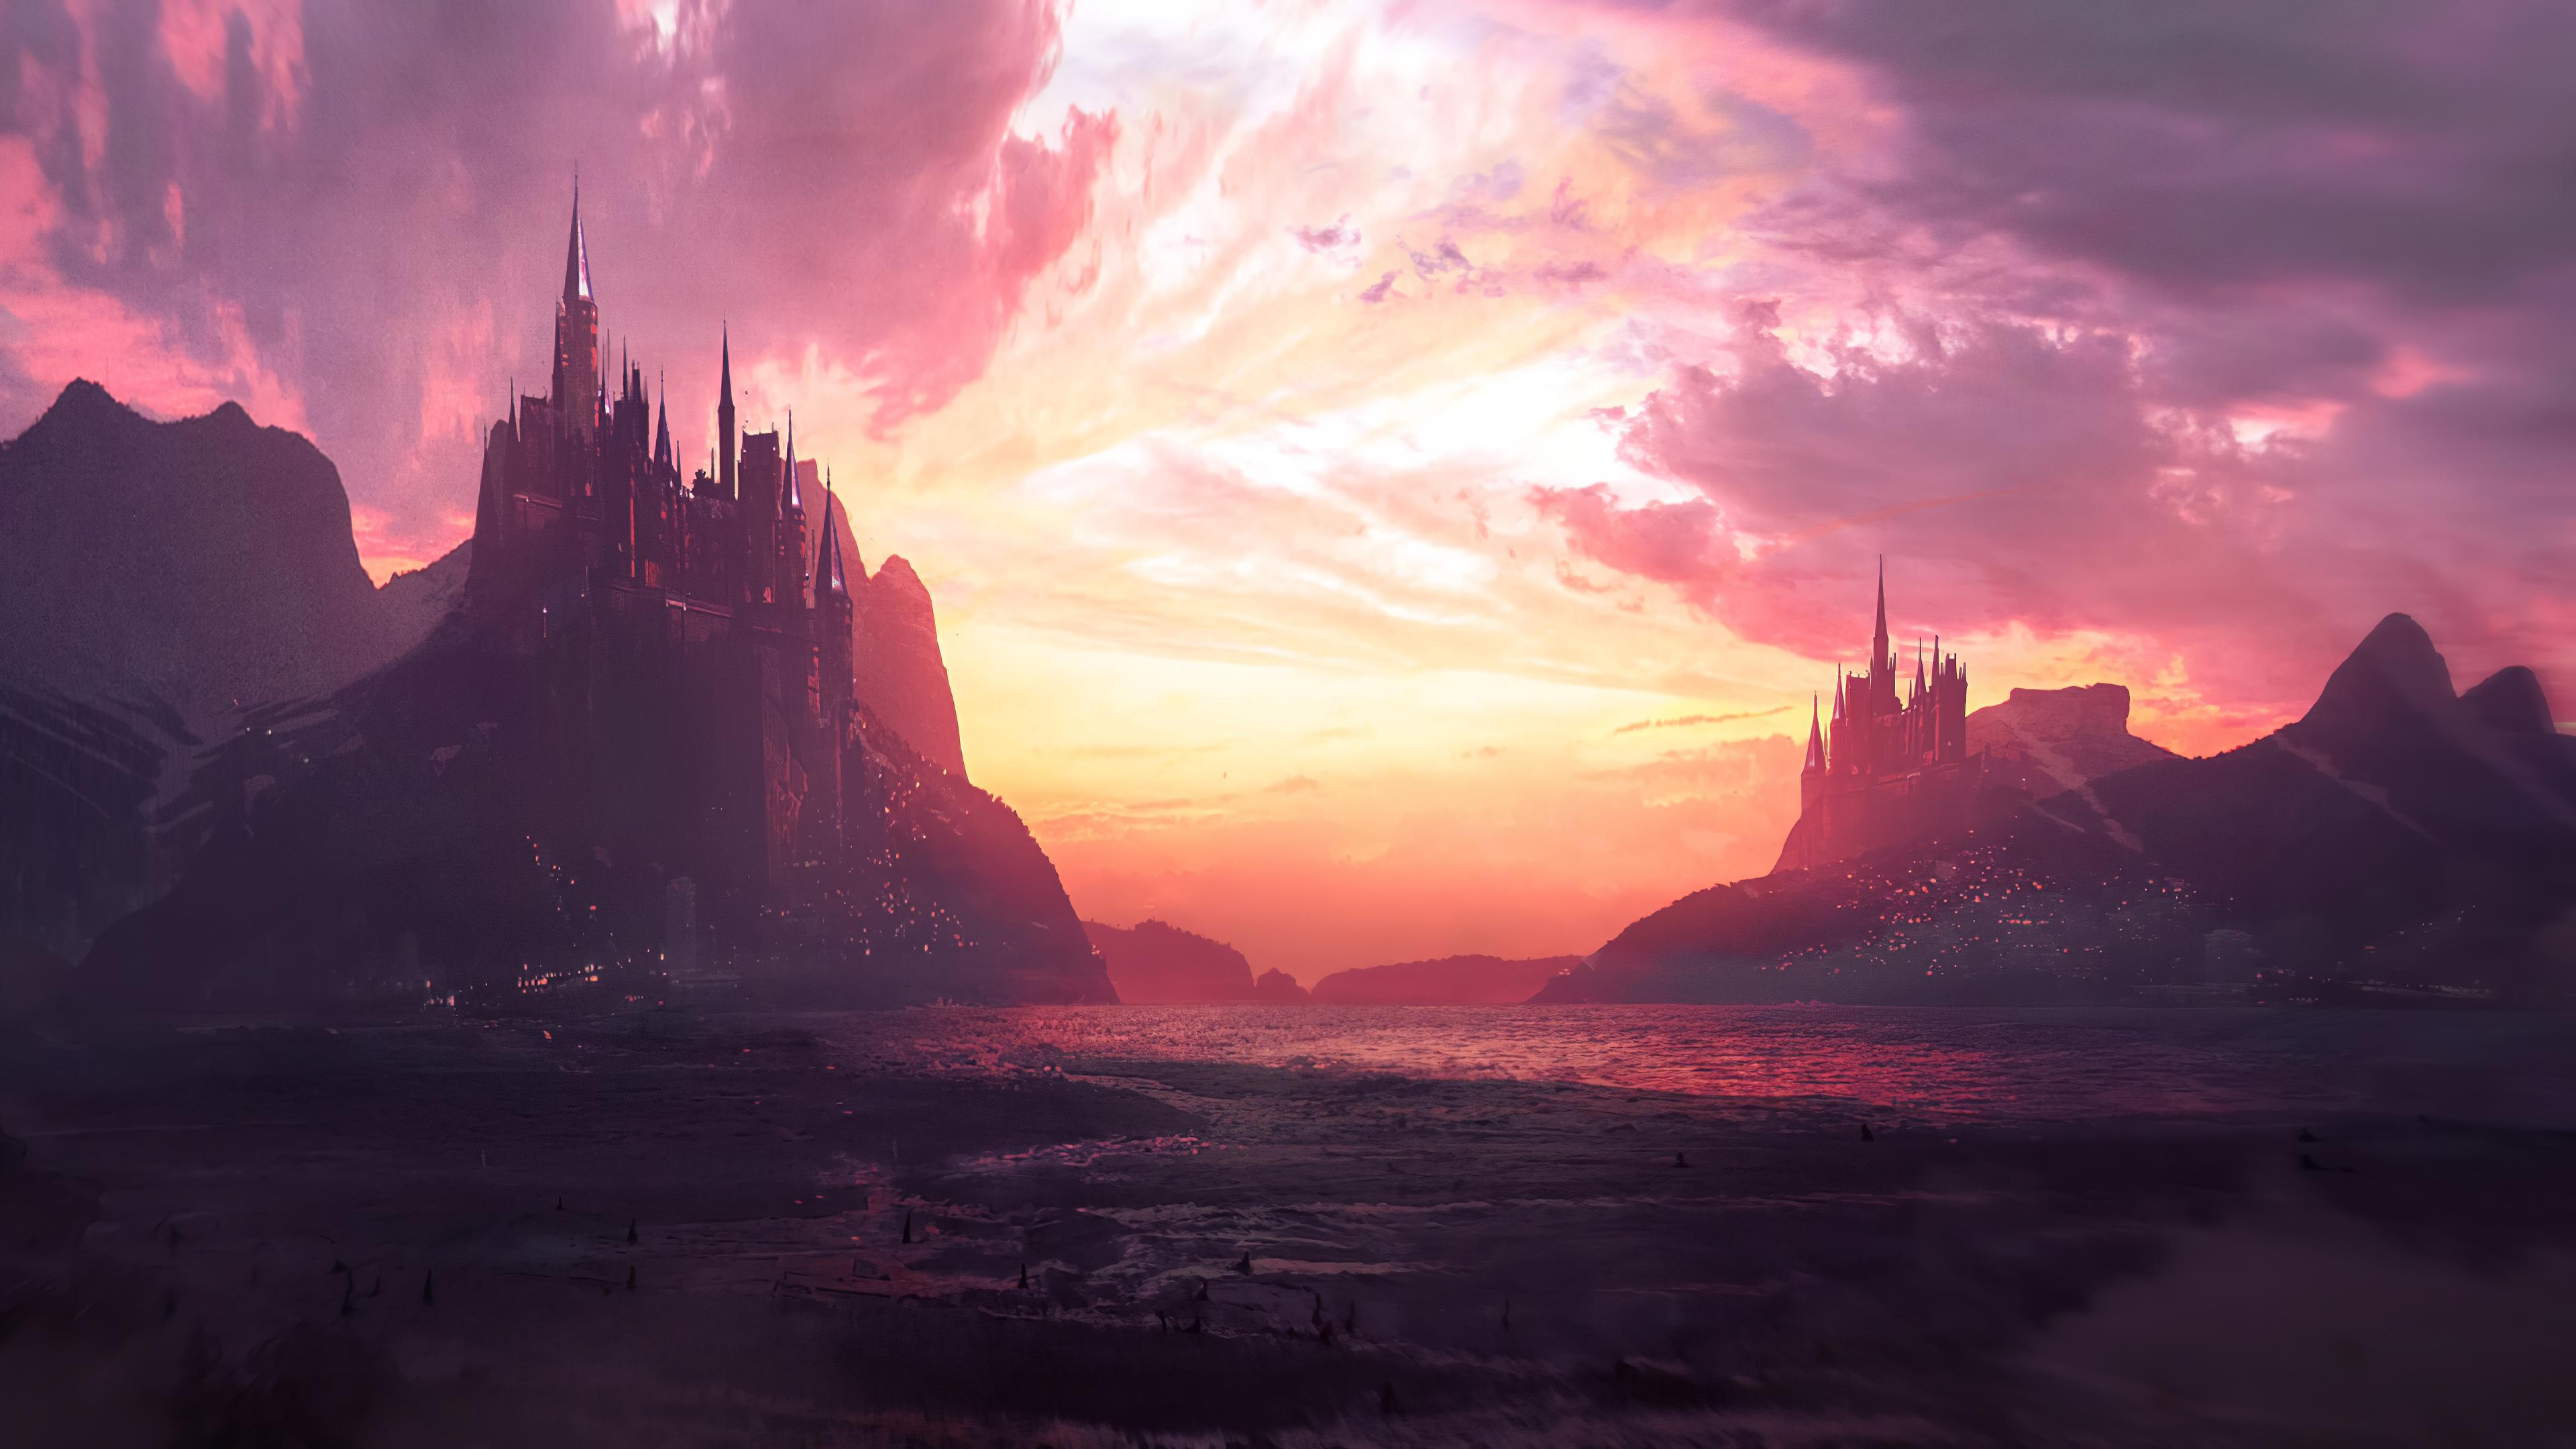 Castles 4K wallpaper for your desktop or mobile screen free and easy to download